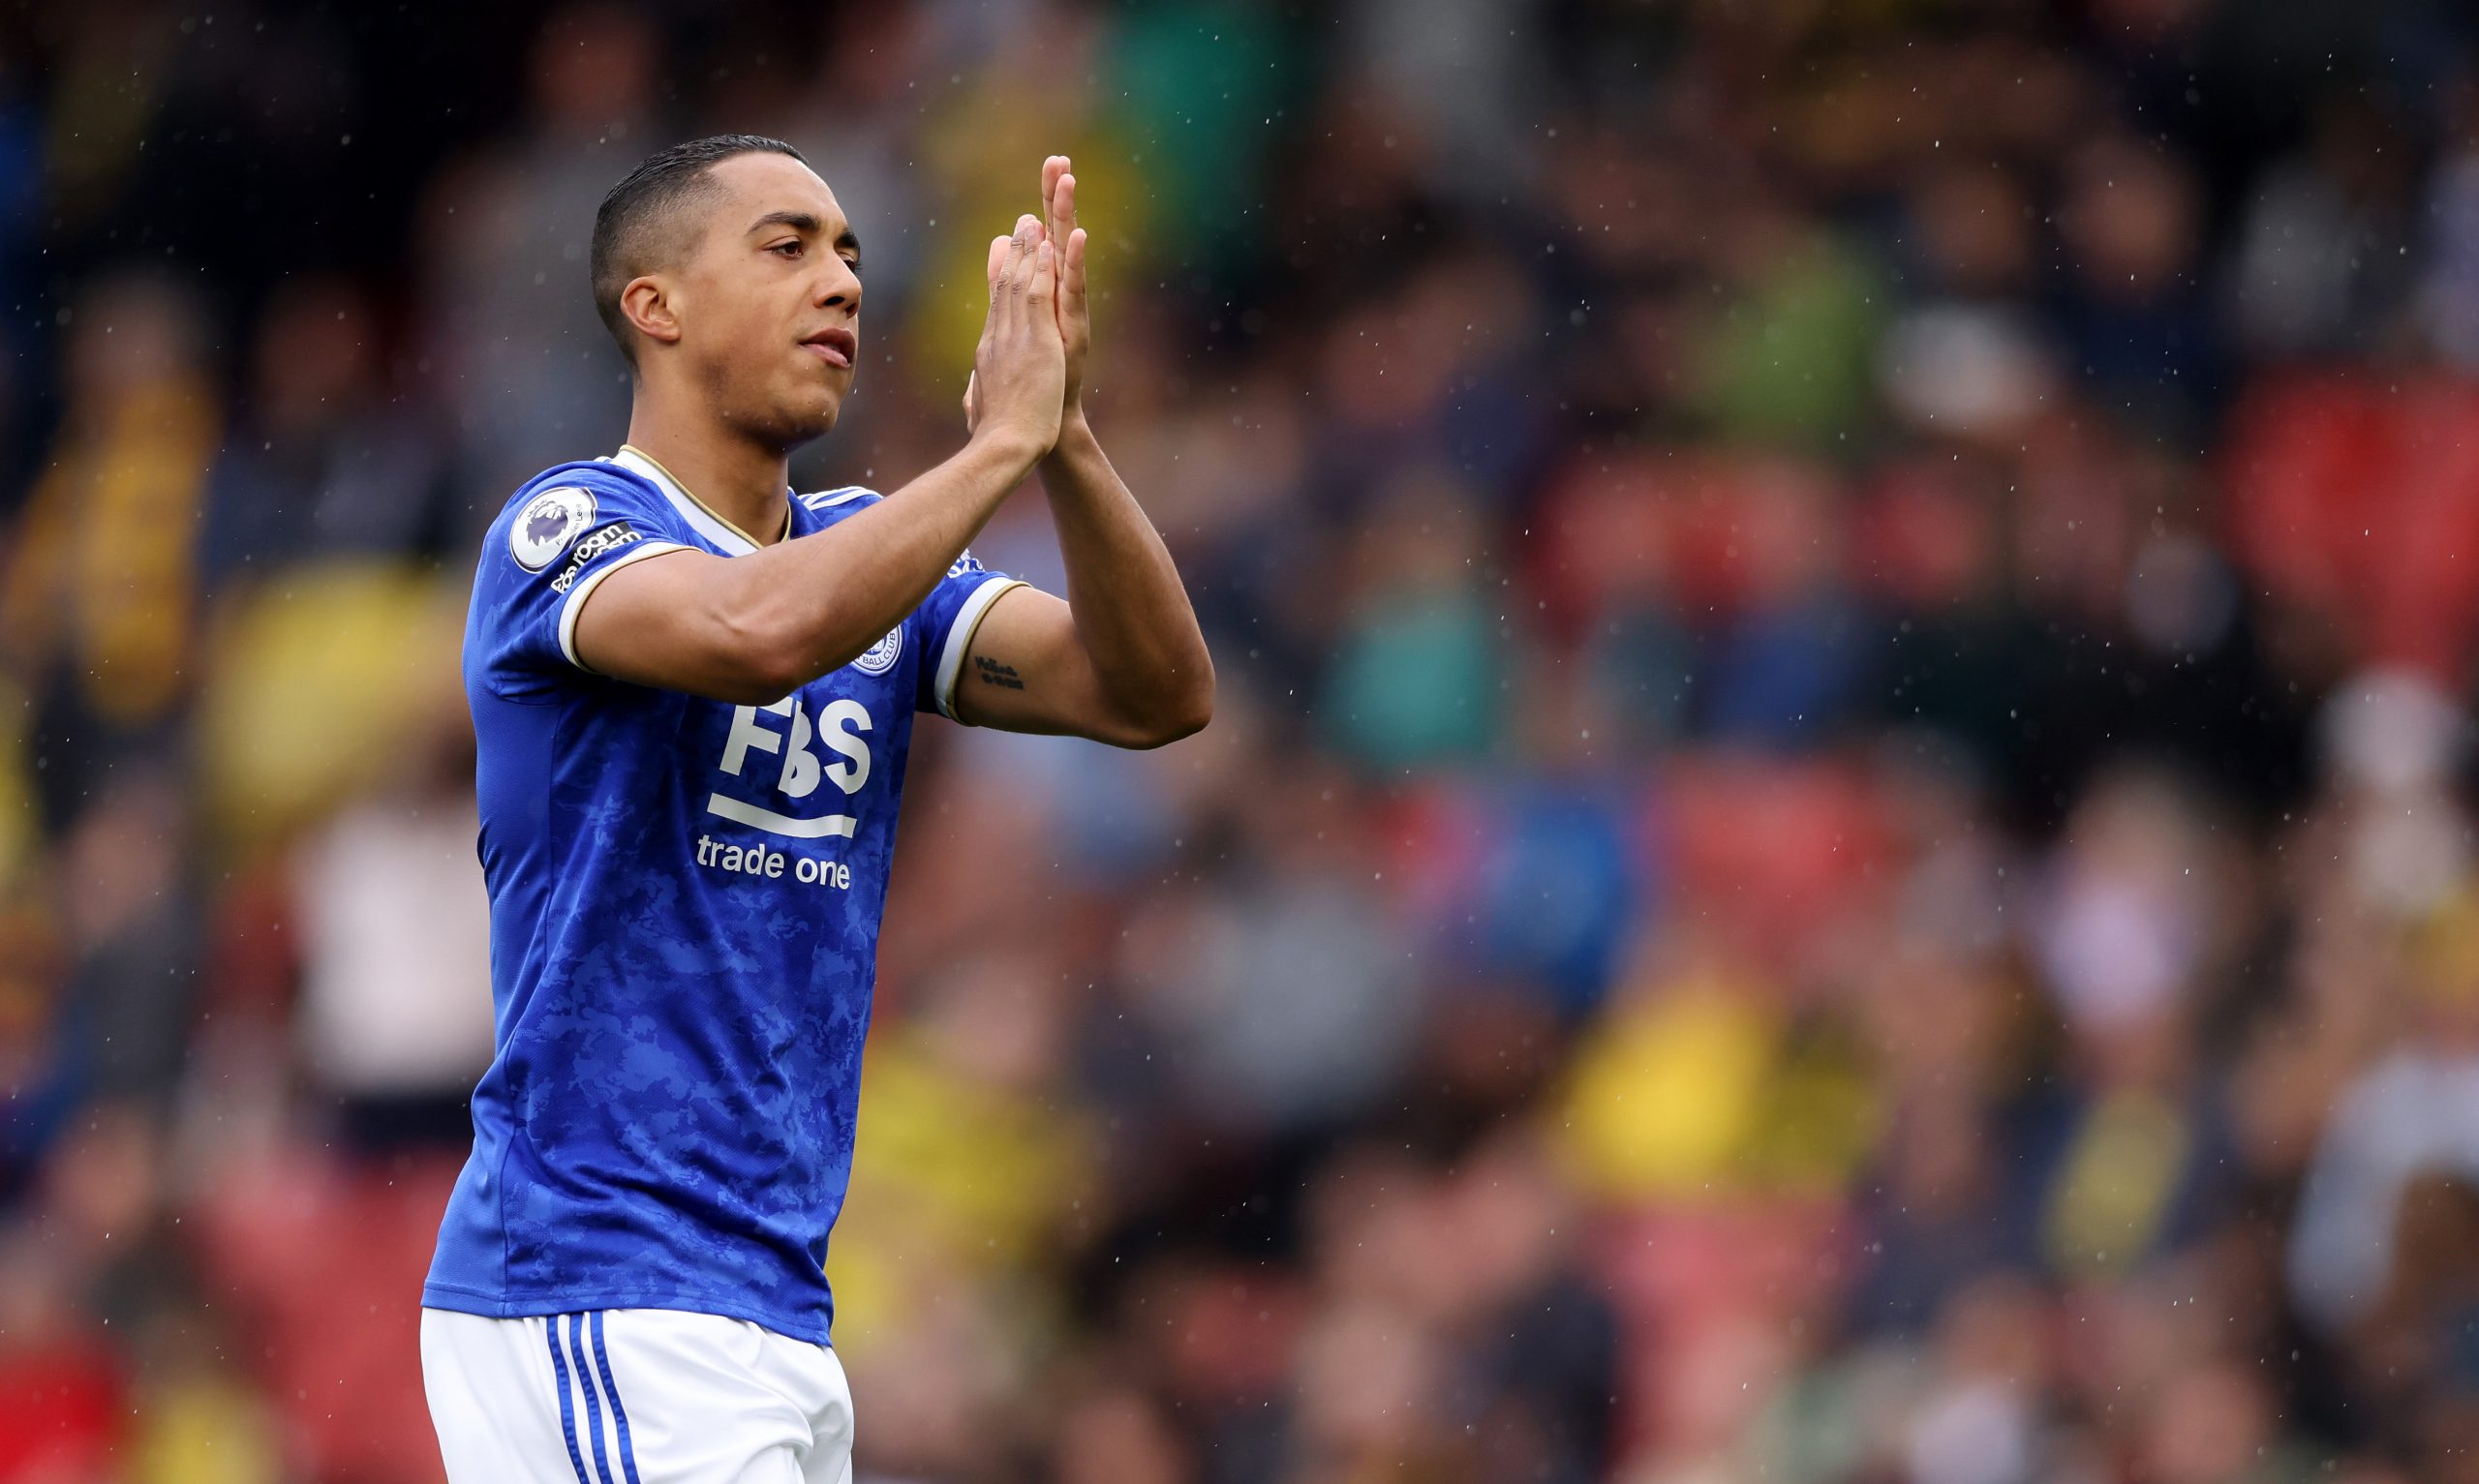 Leicester City (Youri Tielemans)